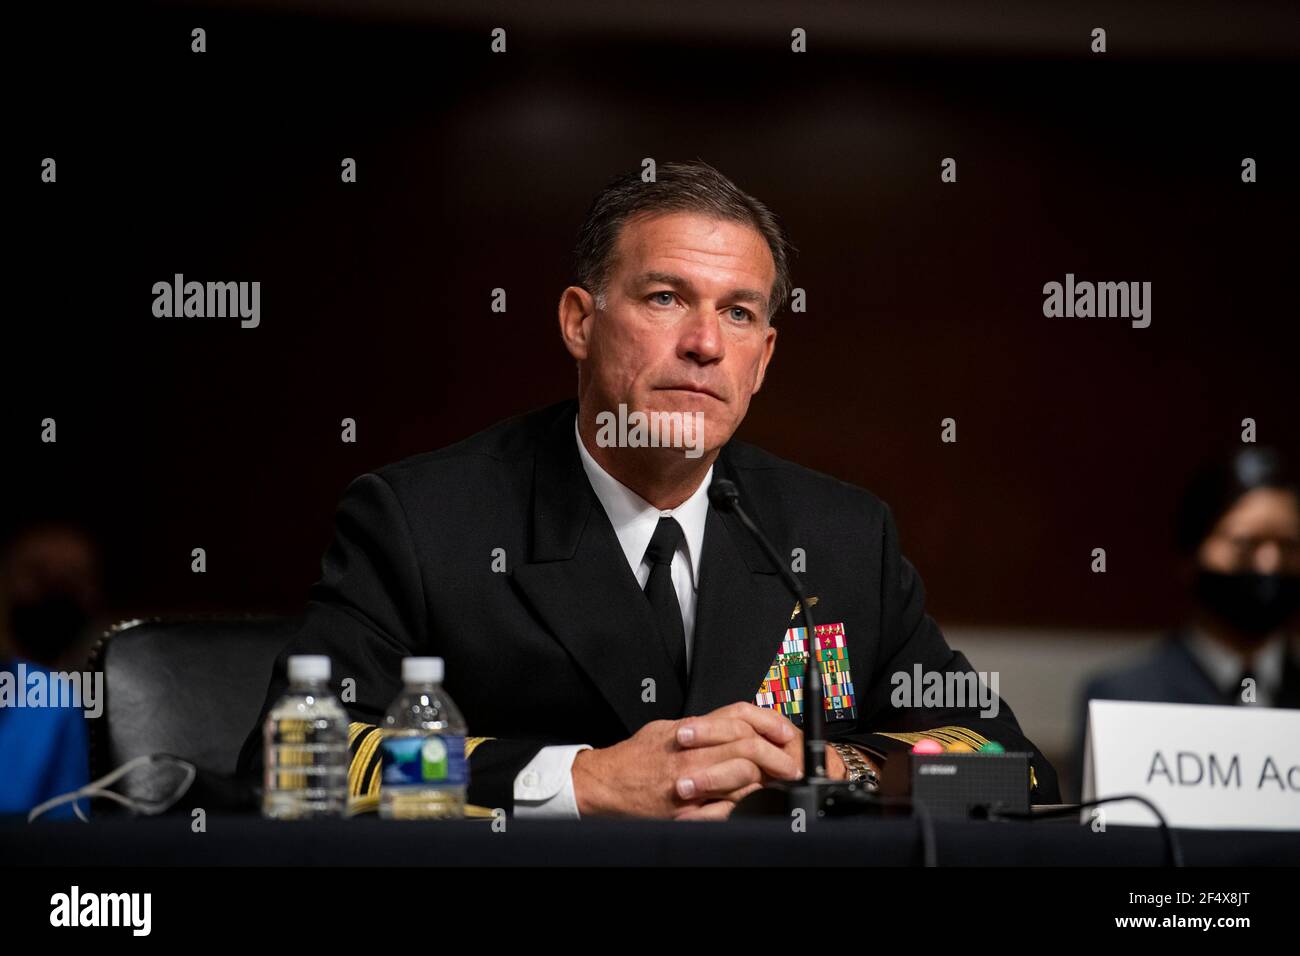 Washington, United States Of America. 23rd Mar, 2021. Admiral John C. Aquilino, USN, appears at a Senate Committee on Armed Services hearing regarding his nomination for reappointment to the grade of admiral and to be Commander, United States Indo-Pacific Command, Department of Defense, in the Dirksen Senate Office Building in Washington, DC, Tuesday, March 23, 2021. Credit: Rod Lamkey/CNP/Sipa USA Credit: Sipa USA/Alamy Live News Stock Photo